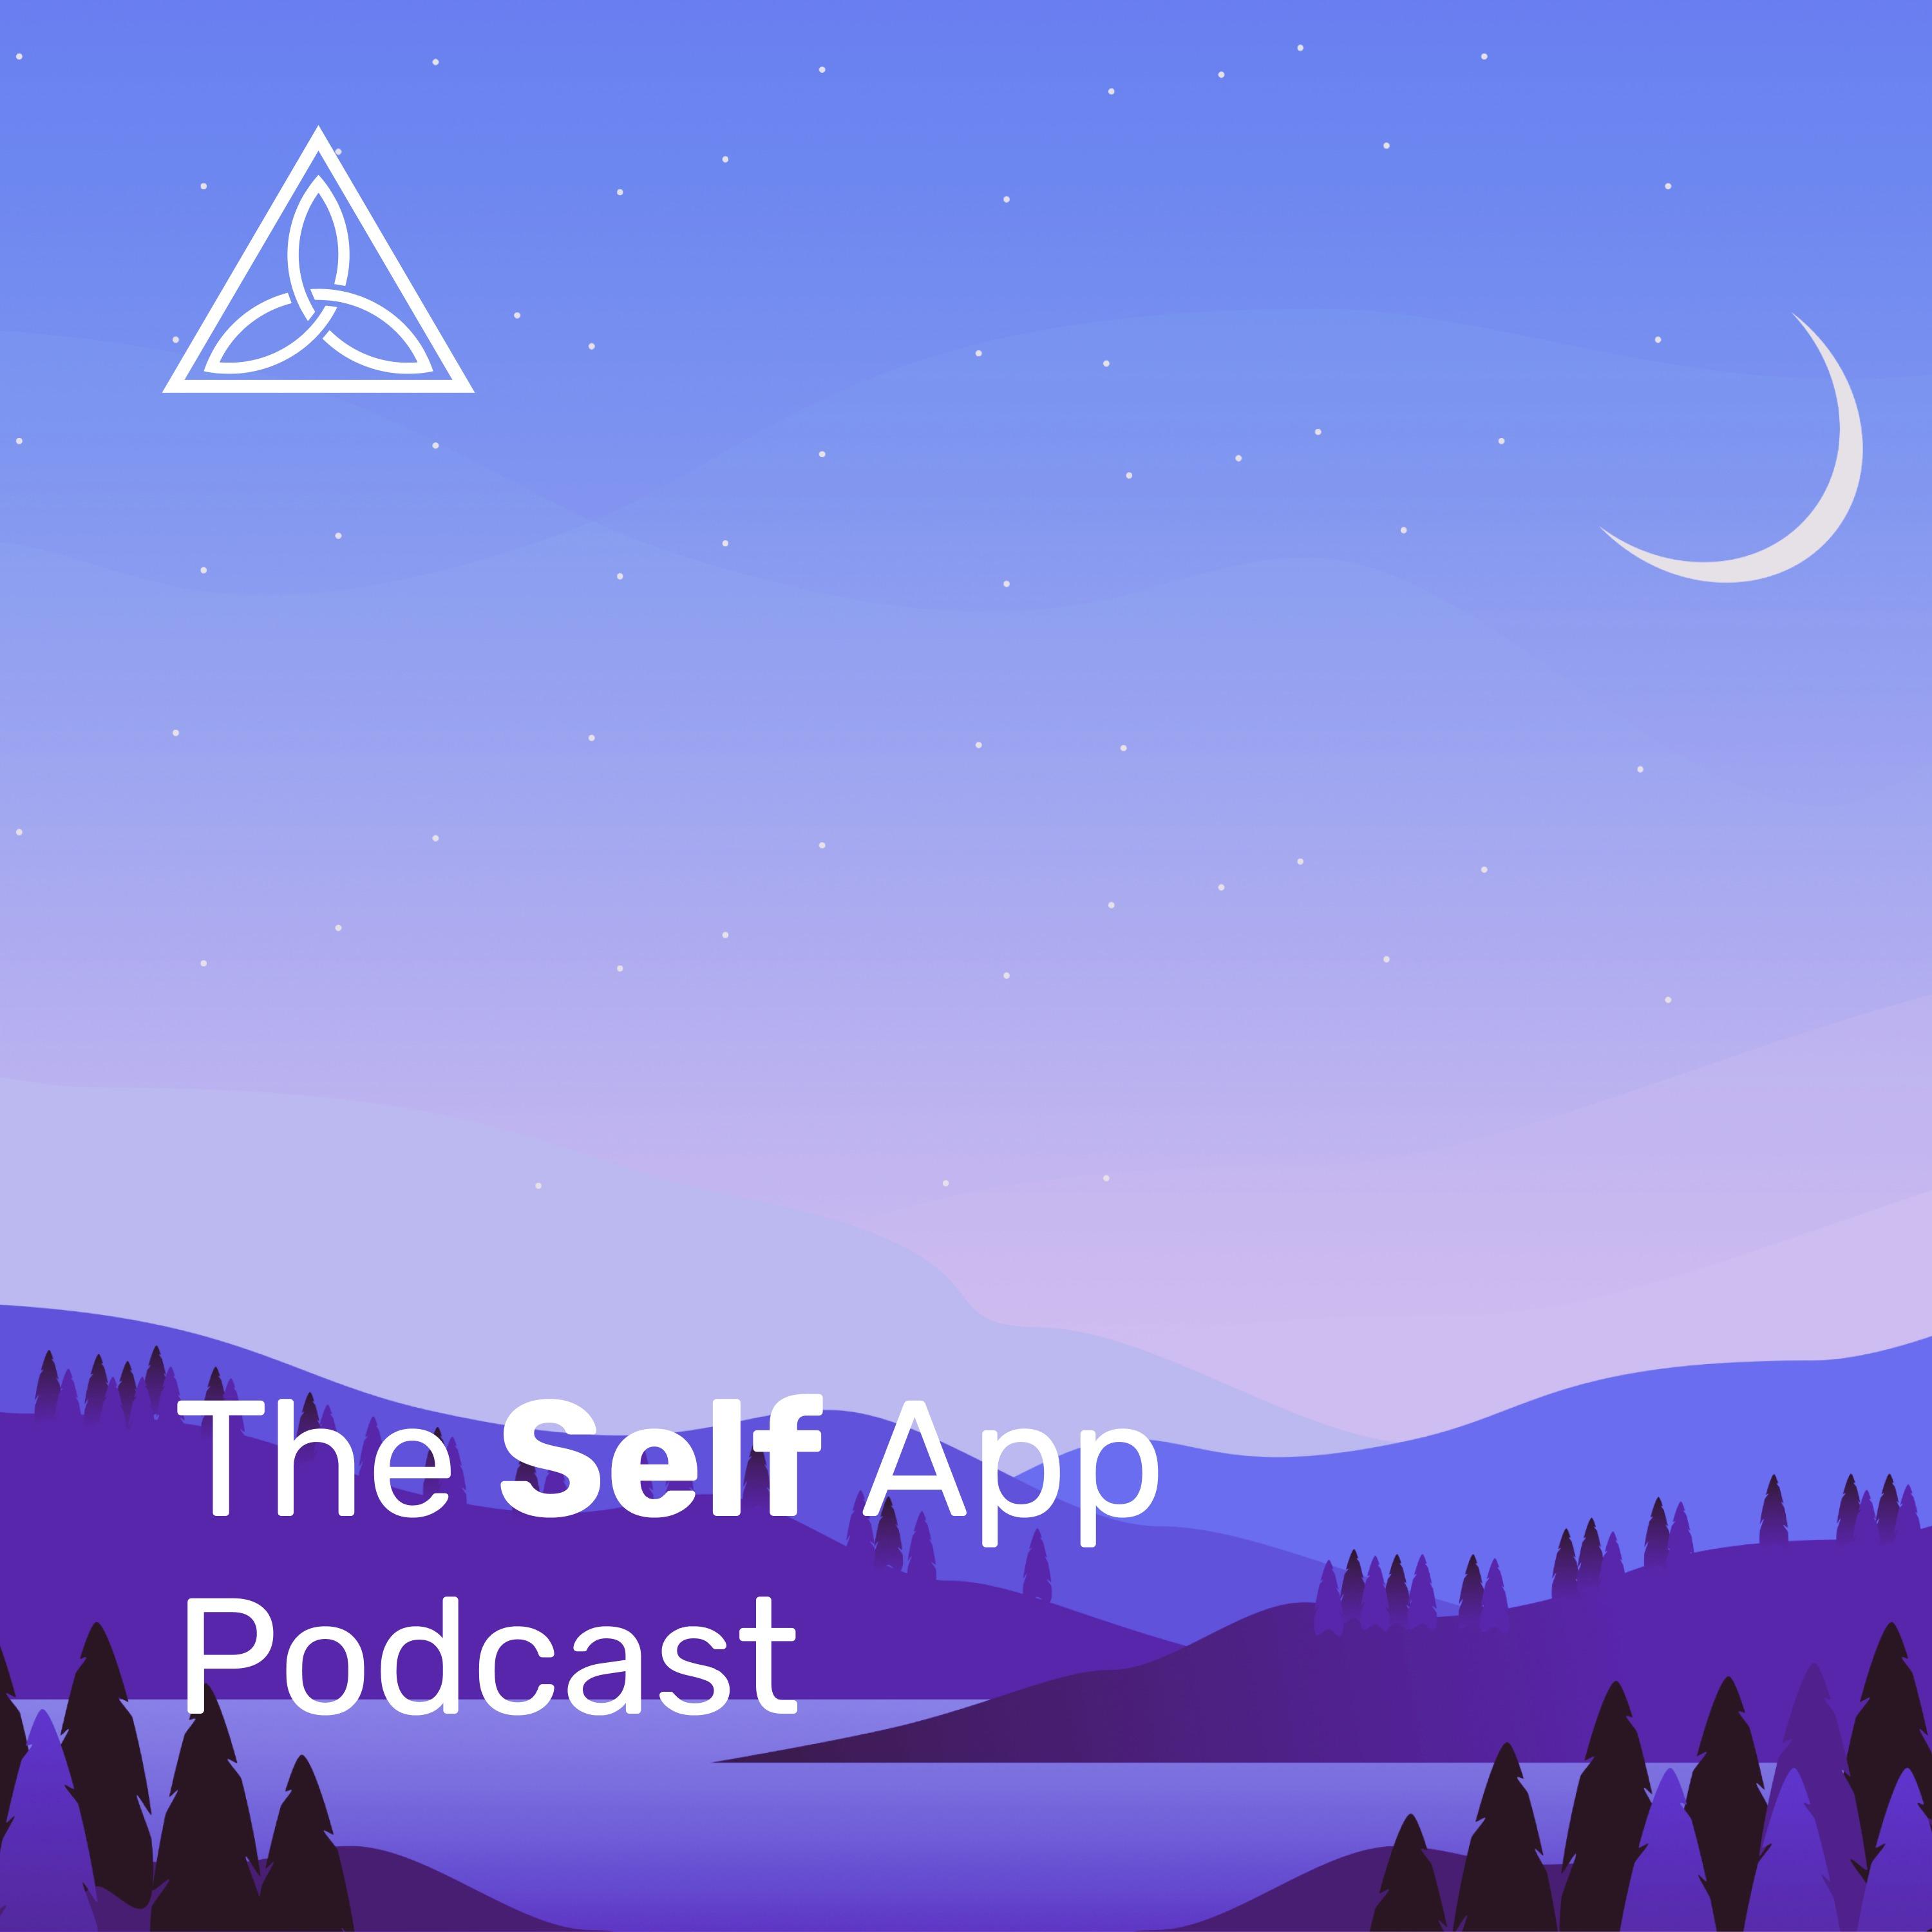 The Self App Podcast